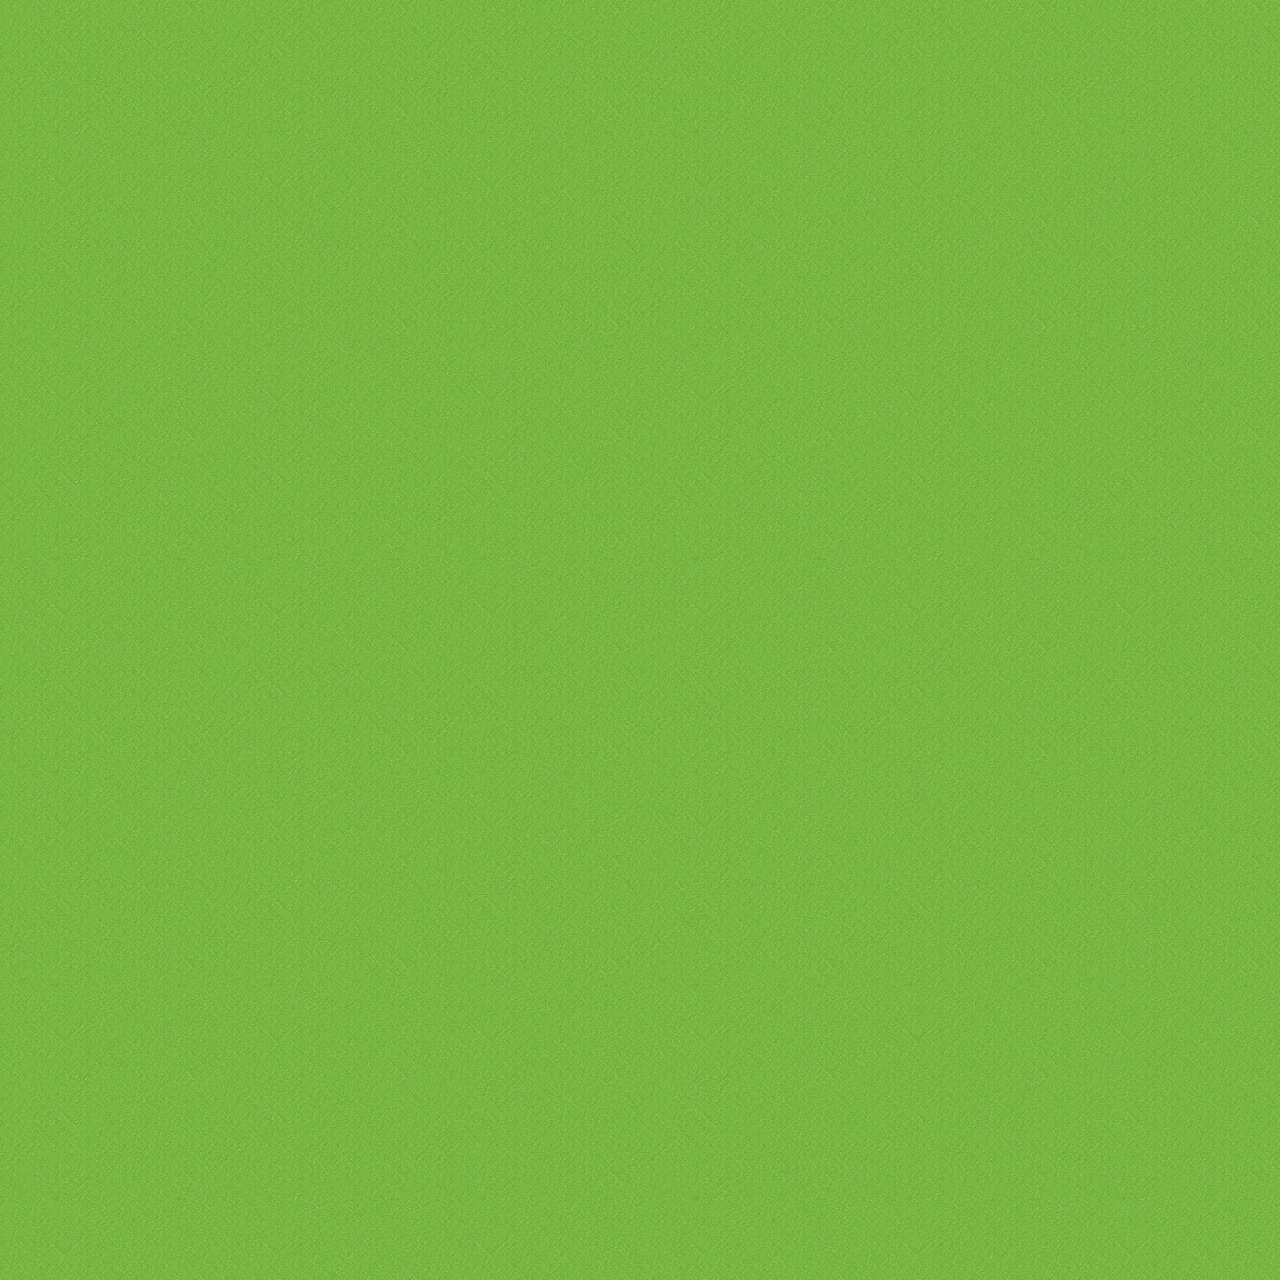 Green Background with Texture